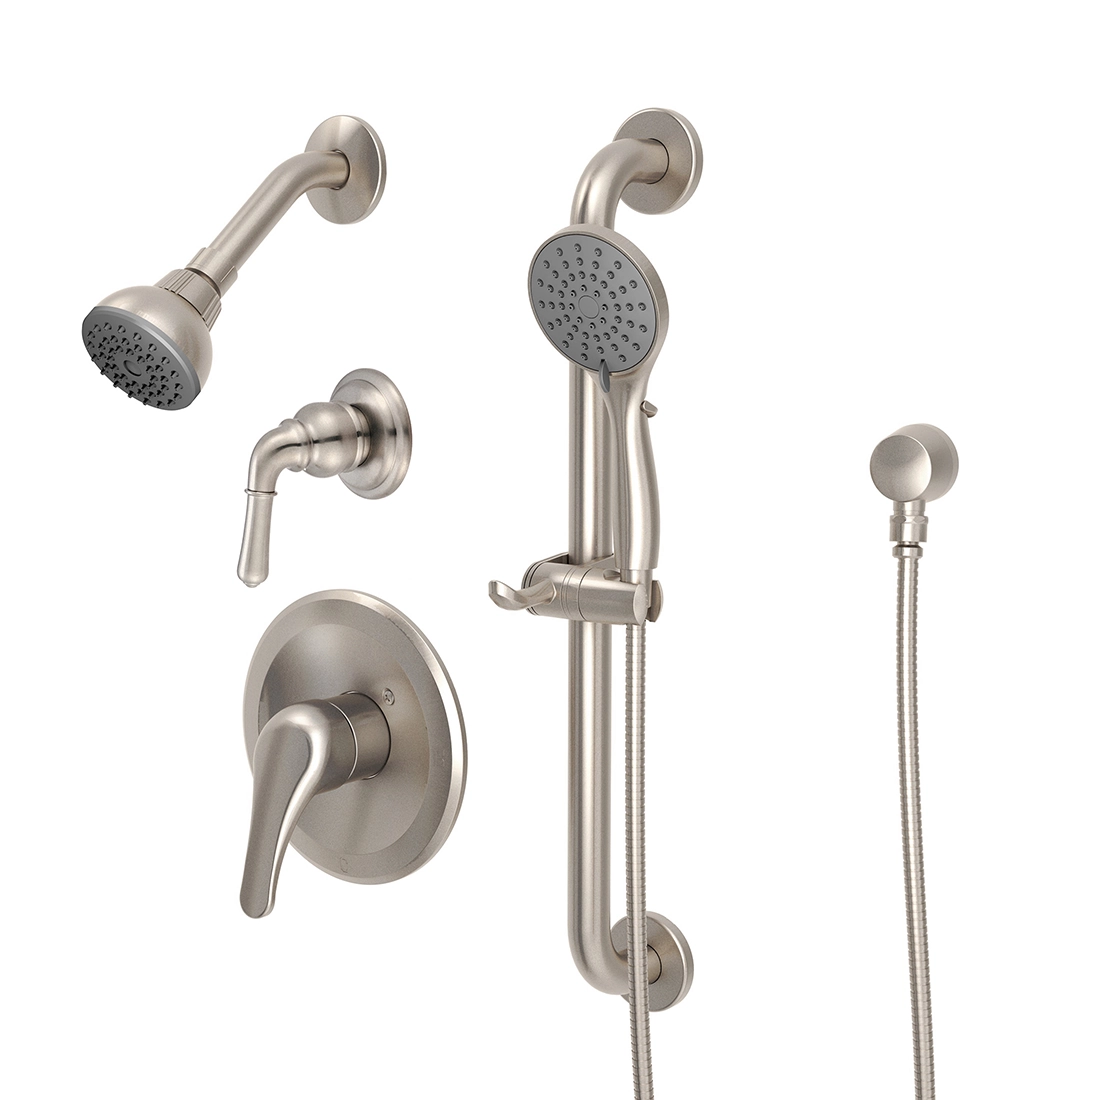 Peachtree Fit Series High Precision & Accuracy Mechanical Bathroom